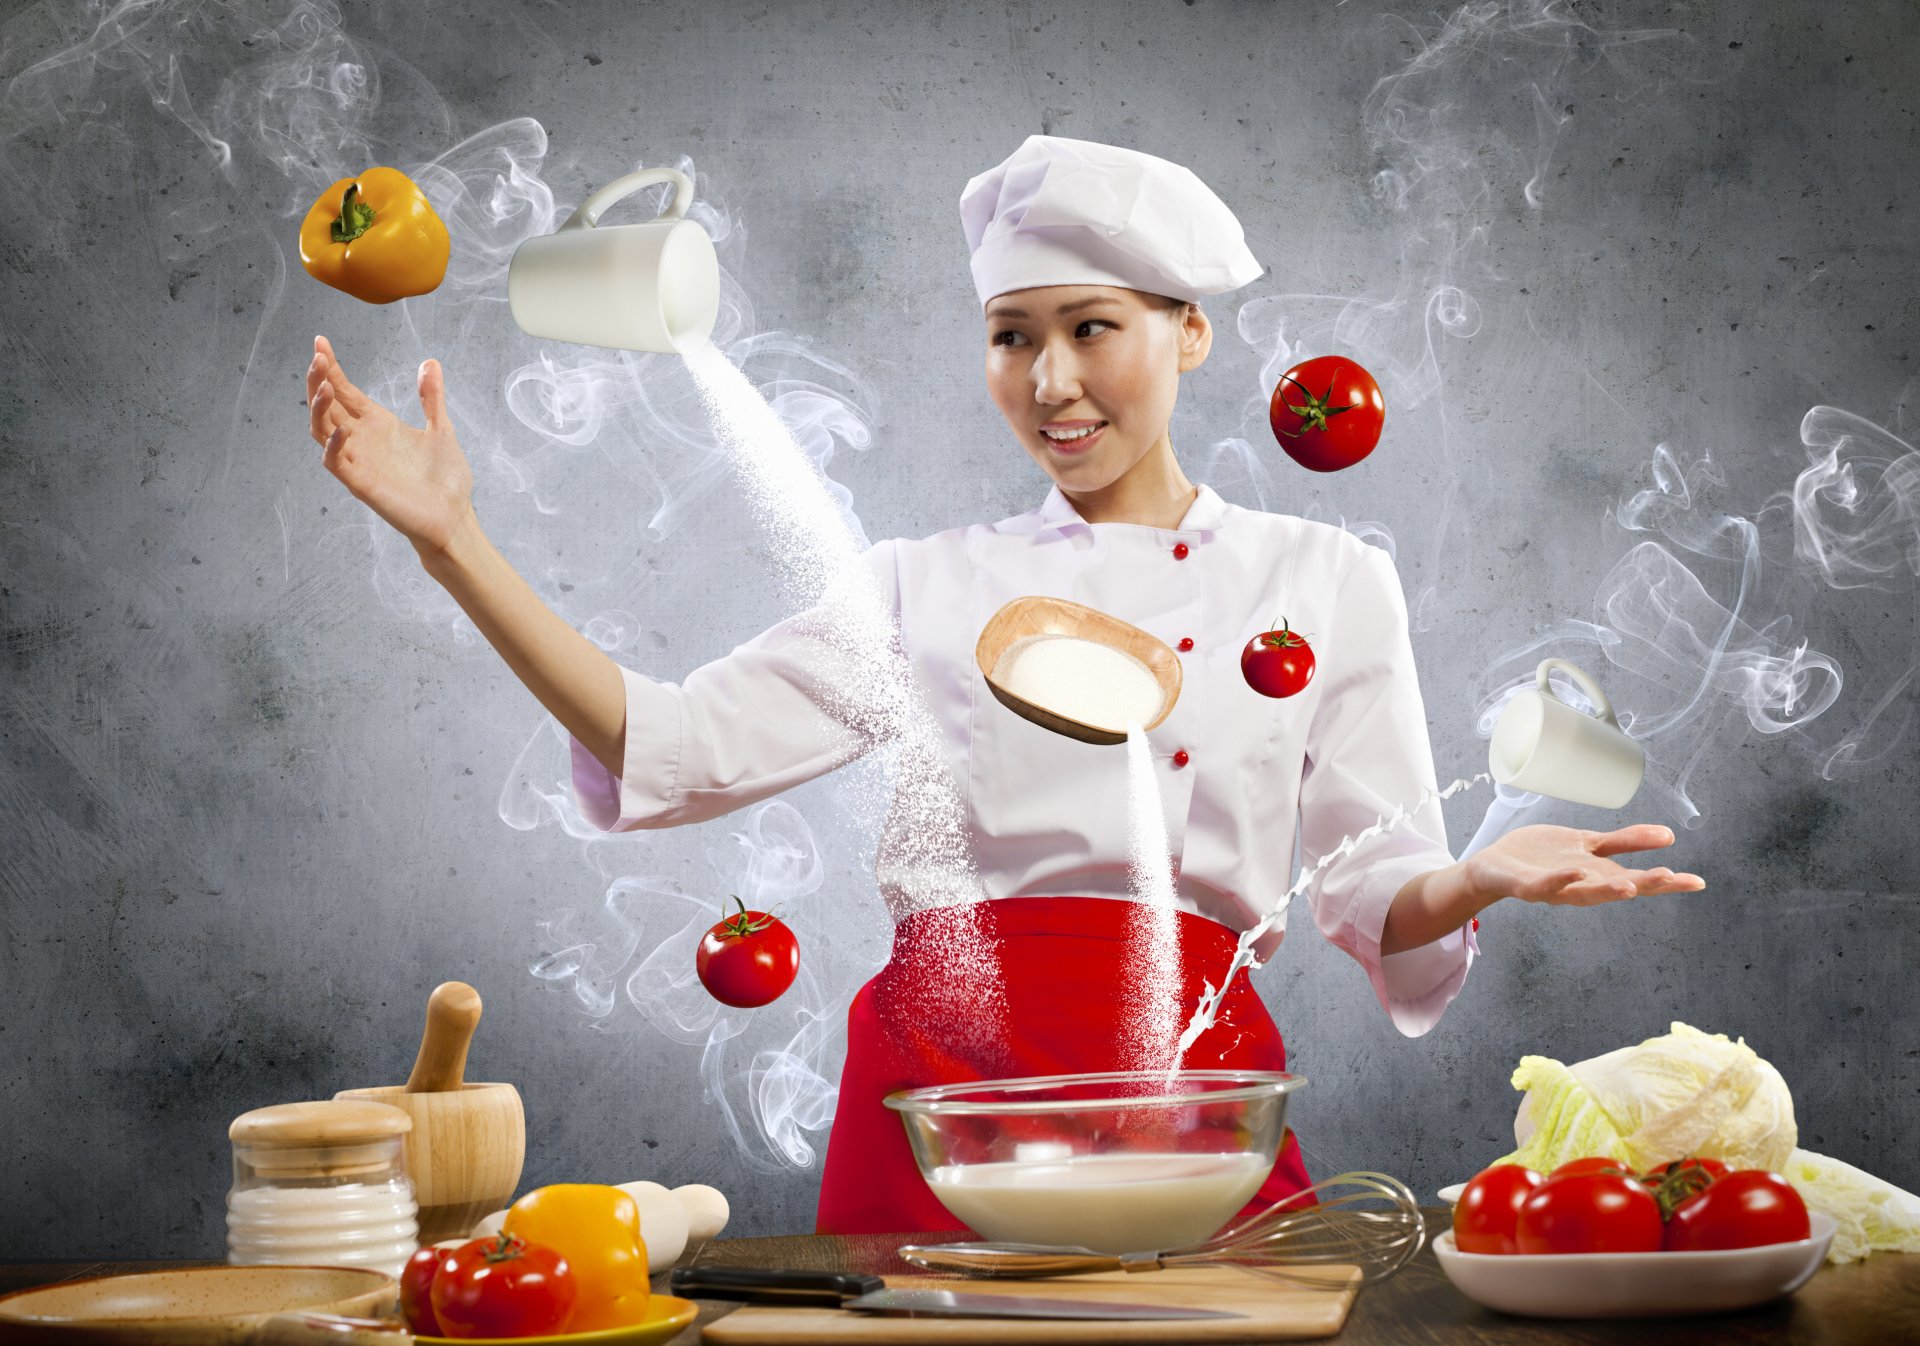 chef wallpaper hd,cook,chef,food,cooking,fruit